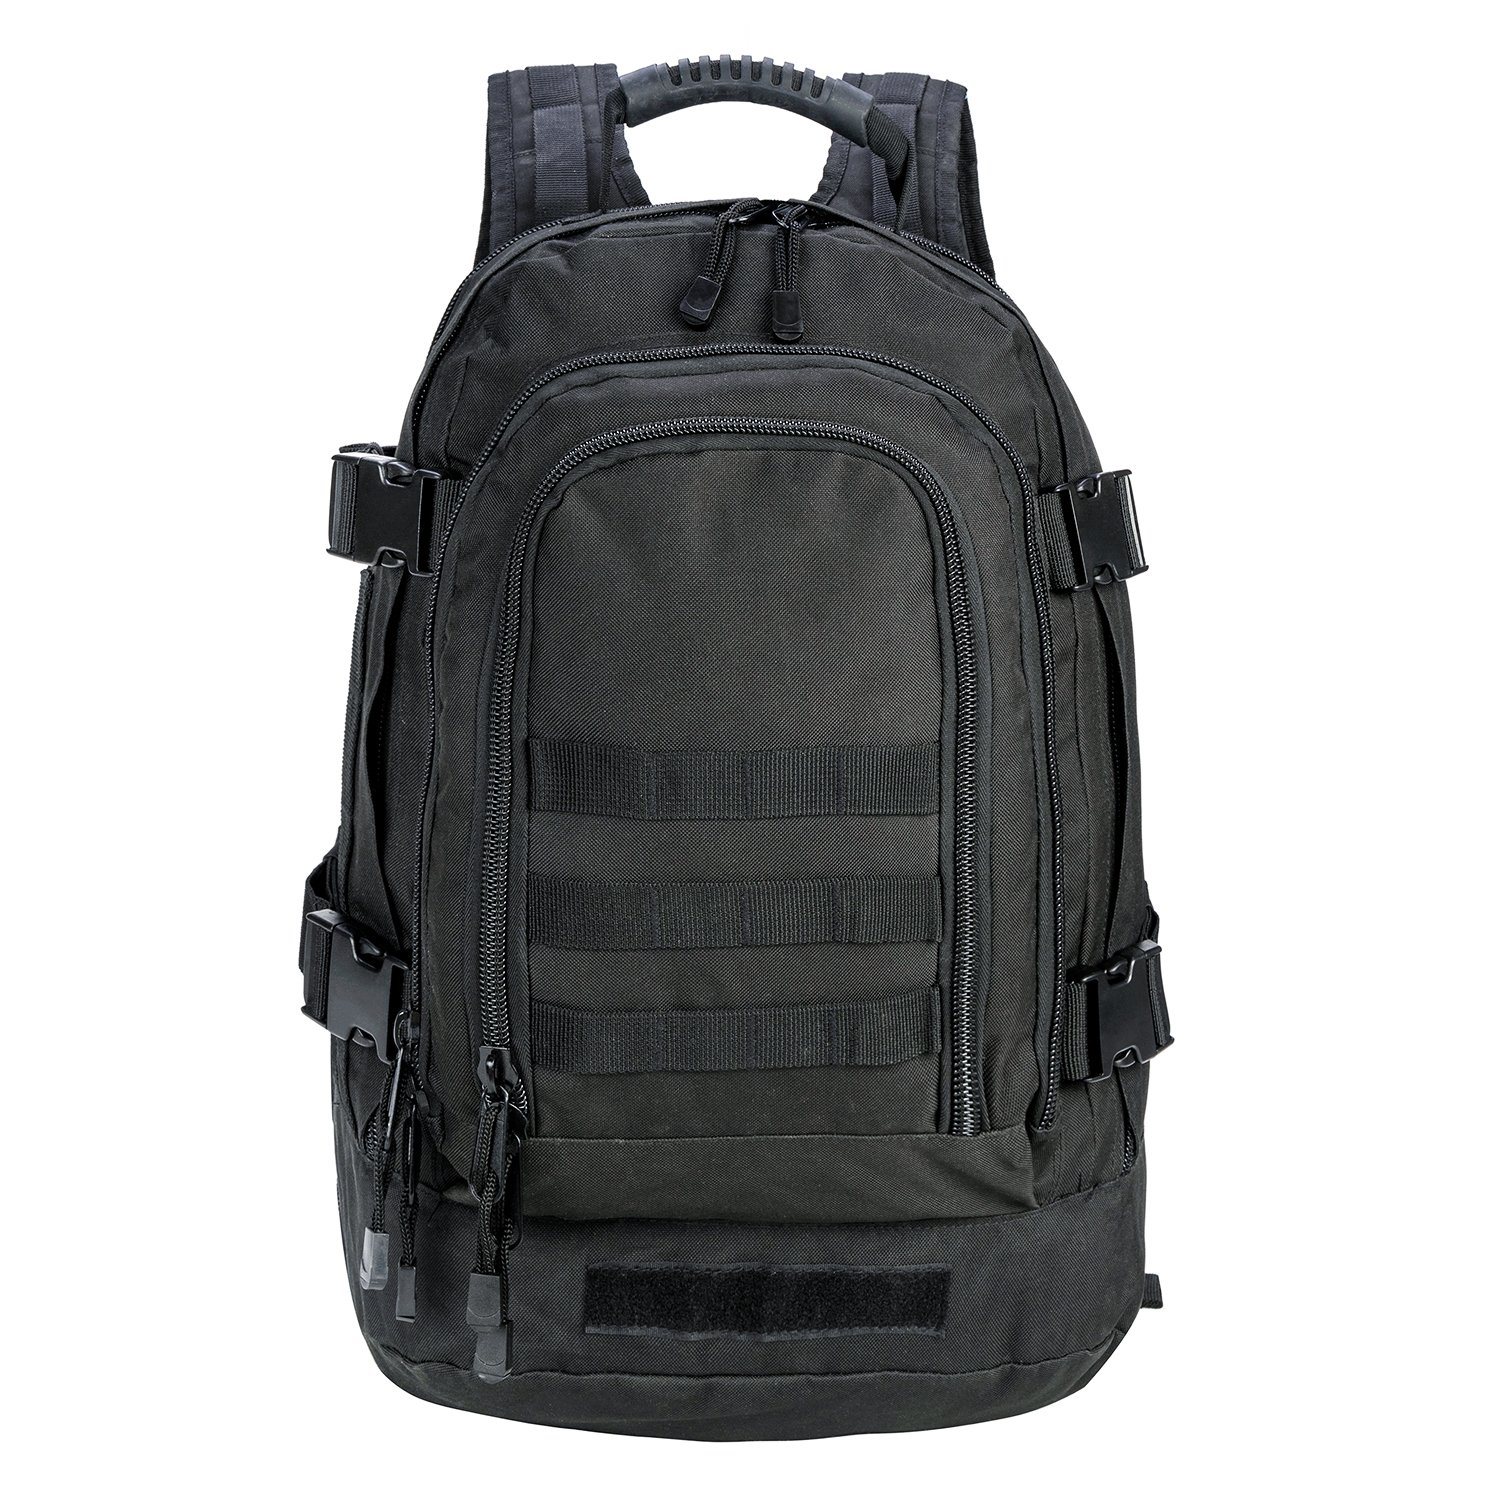 in Stock Tactical Waterproof Large Capacity Backpack for Sports and Outdoors